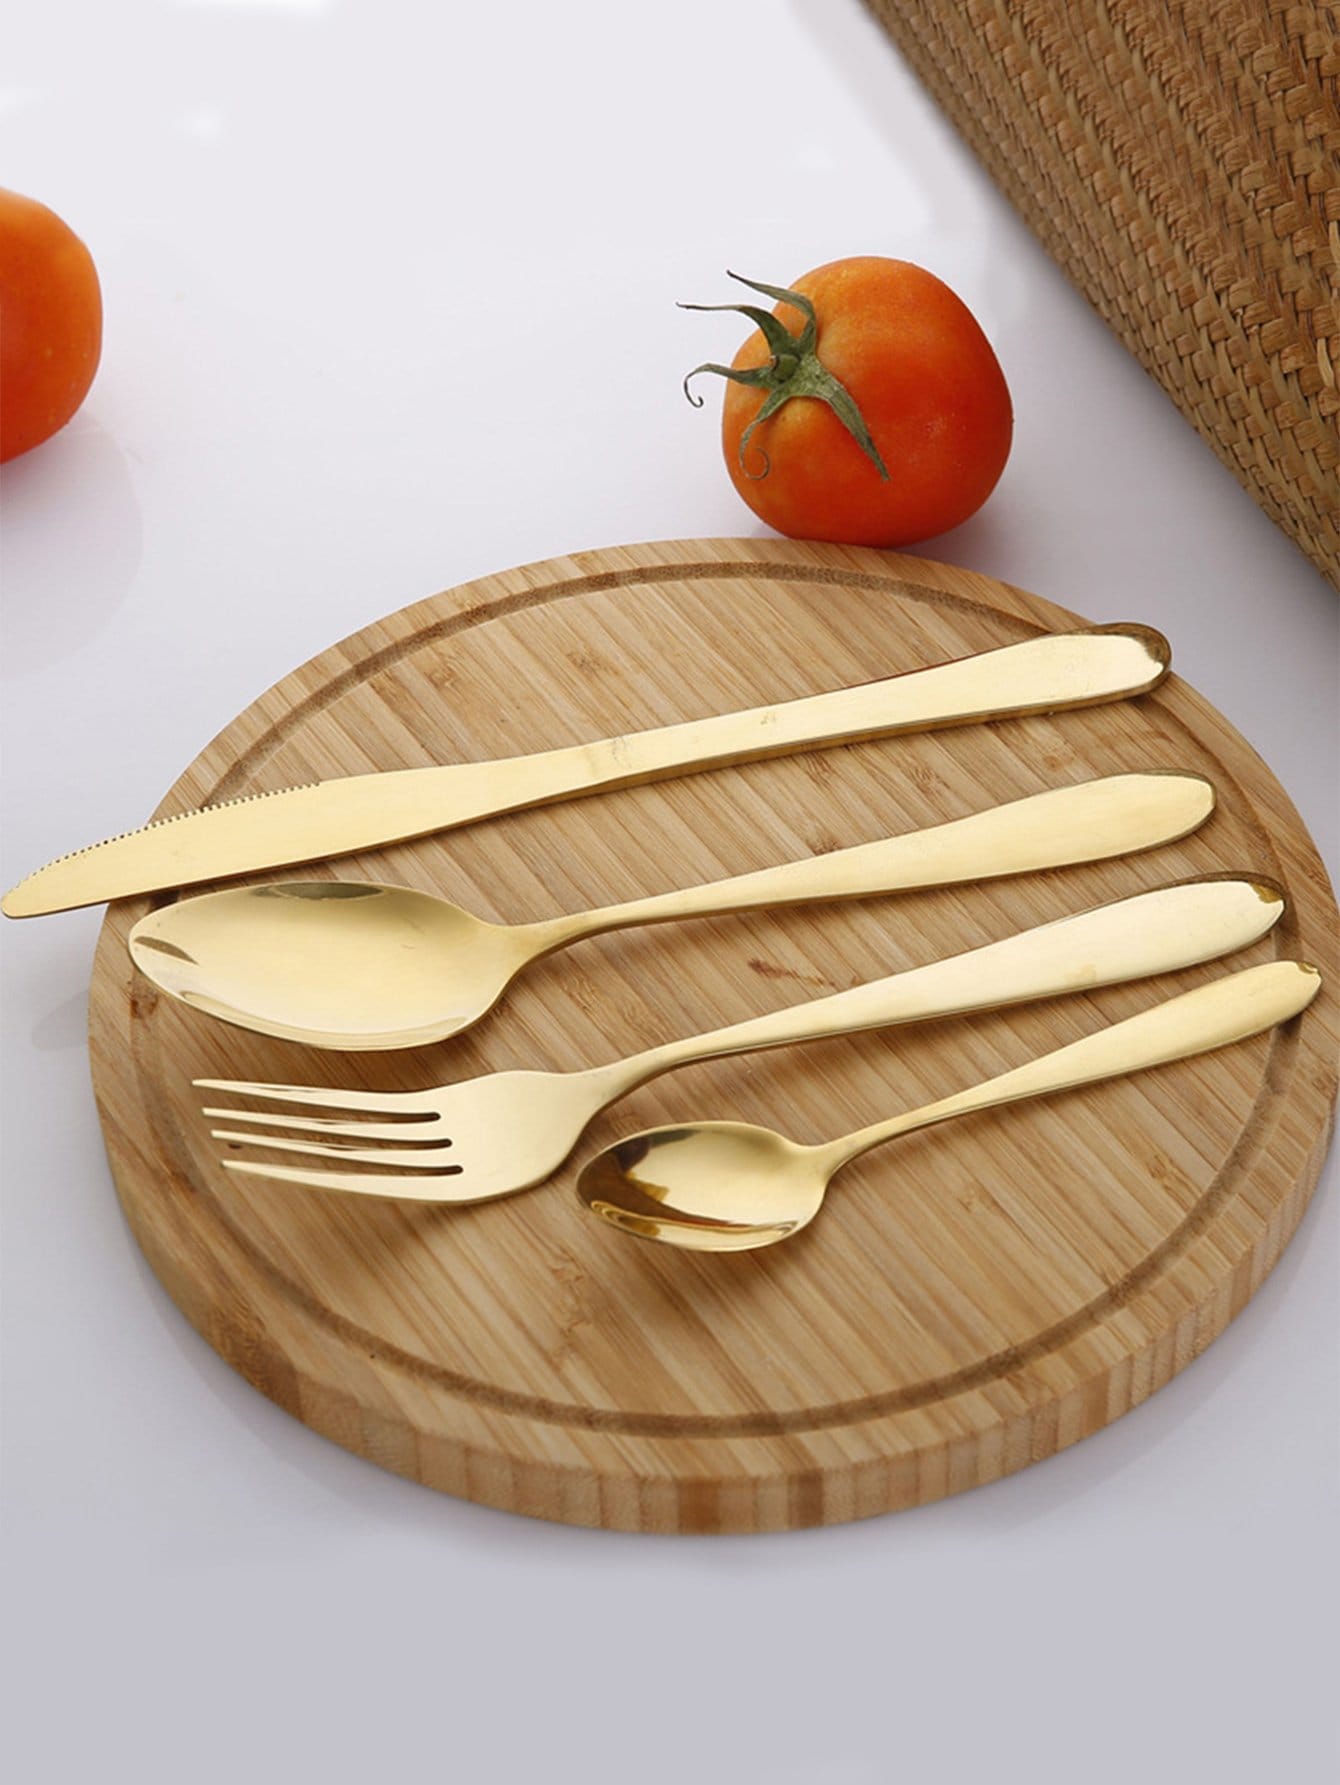 Stainless Steel Cutlery 4pcs